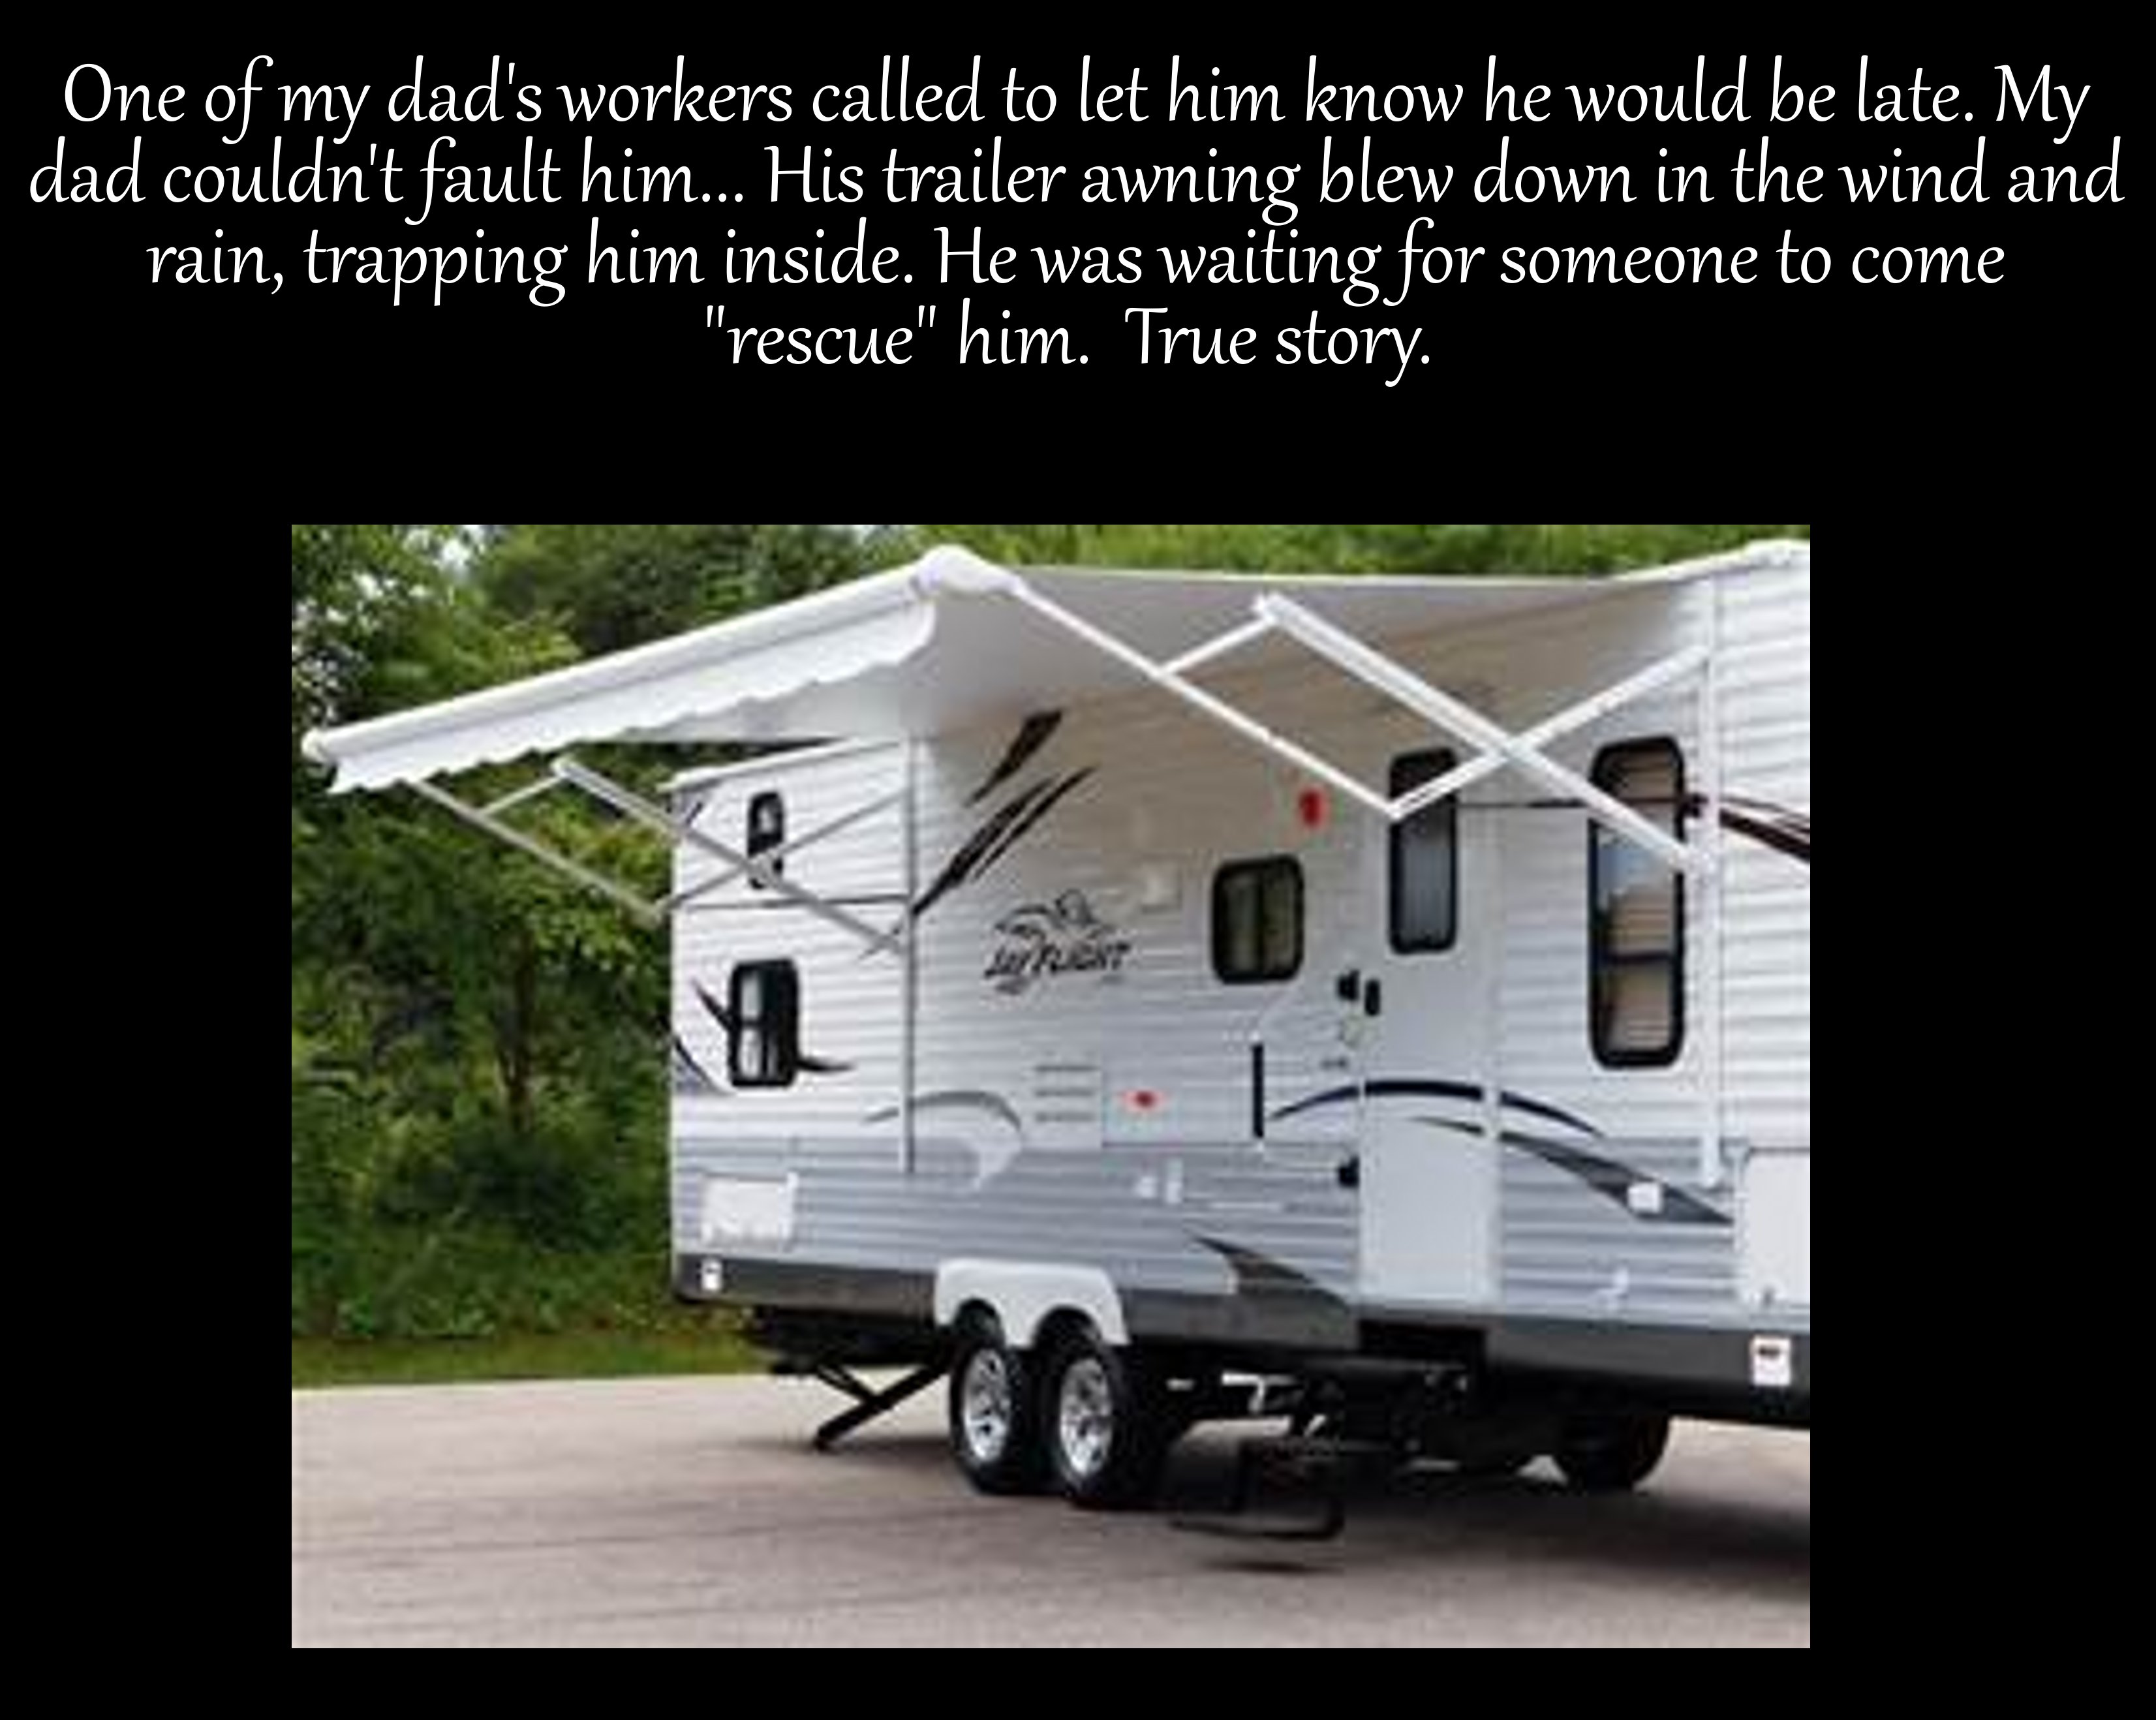 travel trailer awnings - One of my dad's workers called to let him know he would be late. My dad couldn't fault him... His trailer awning blew down in the wind and rain, trapping him inside. He was waiting for someone to come "rescue" him. True story. Ort